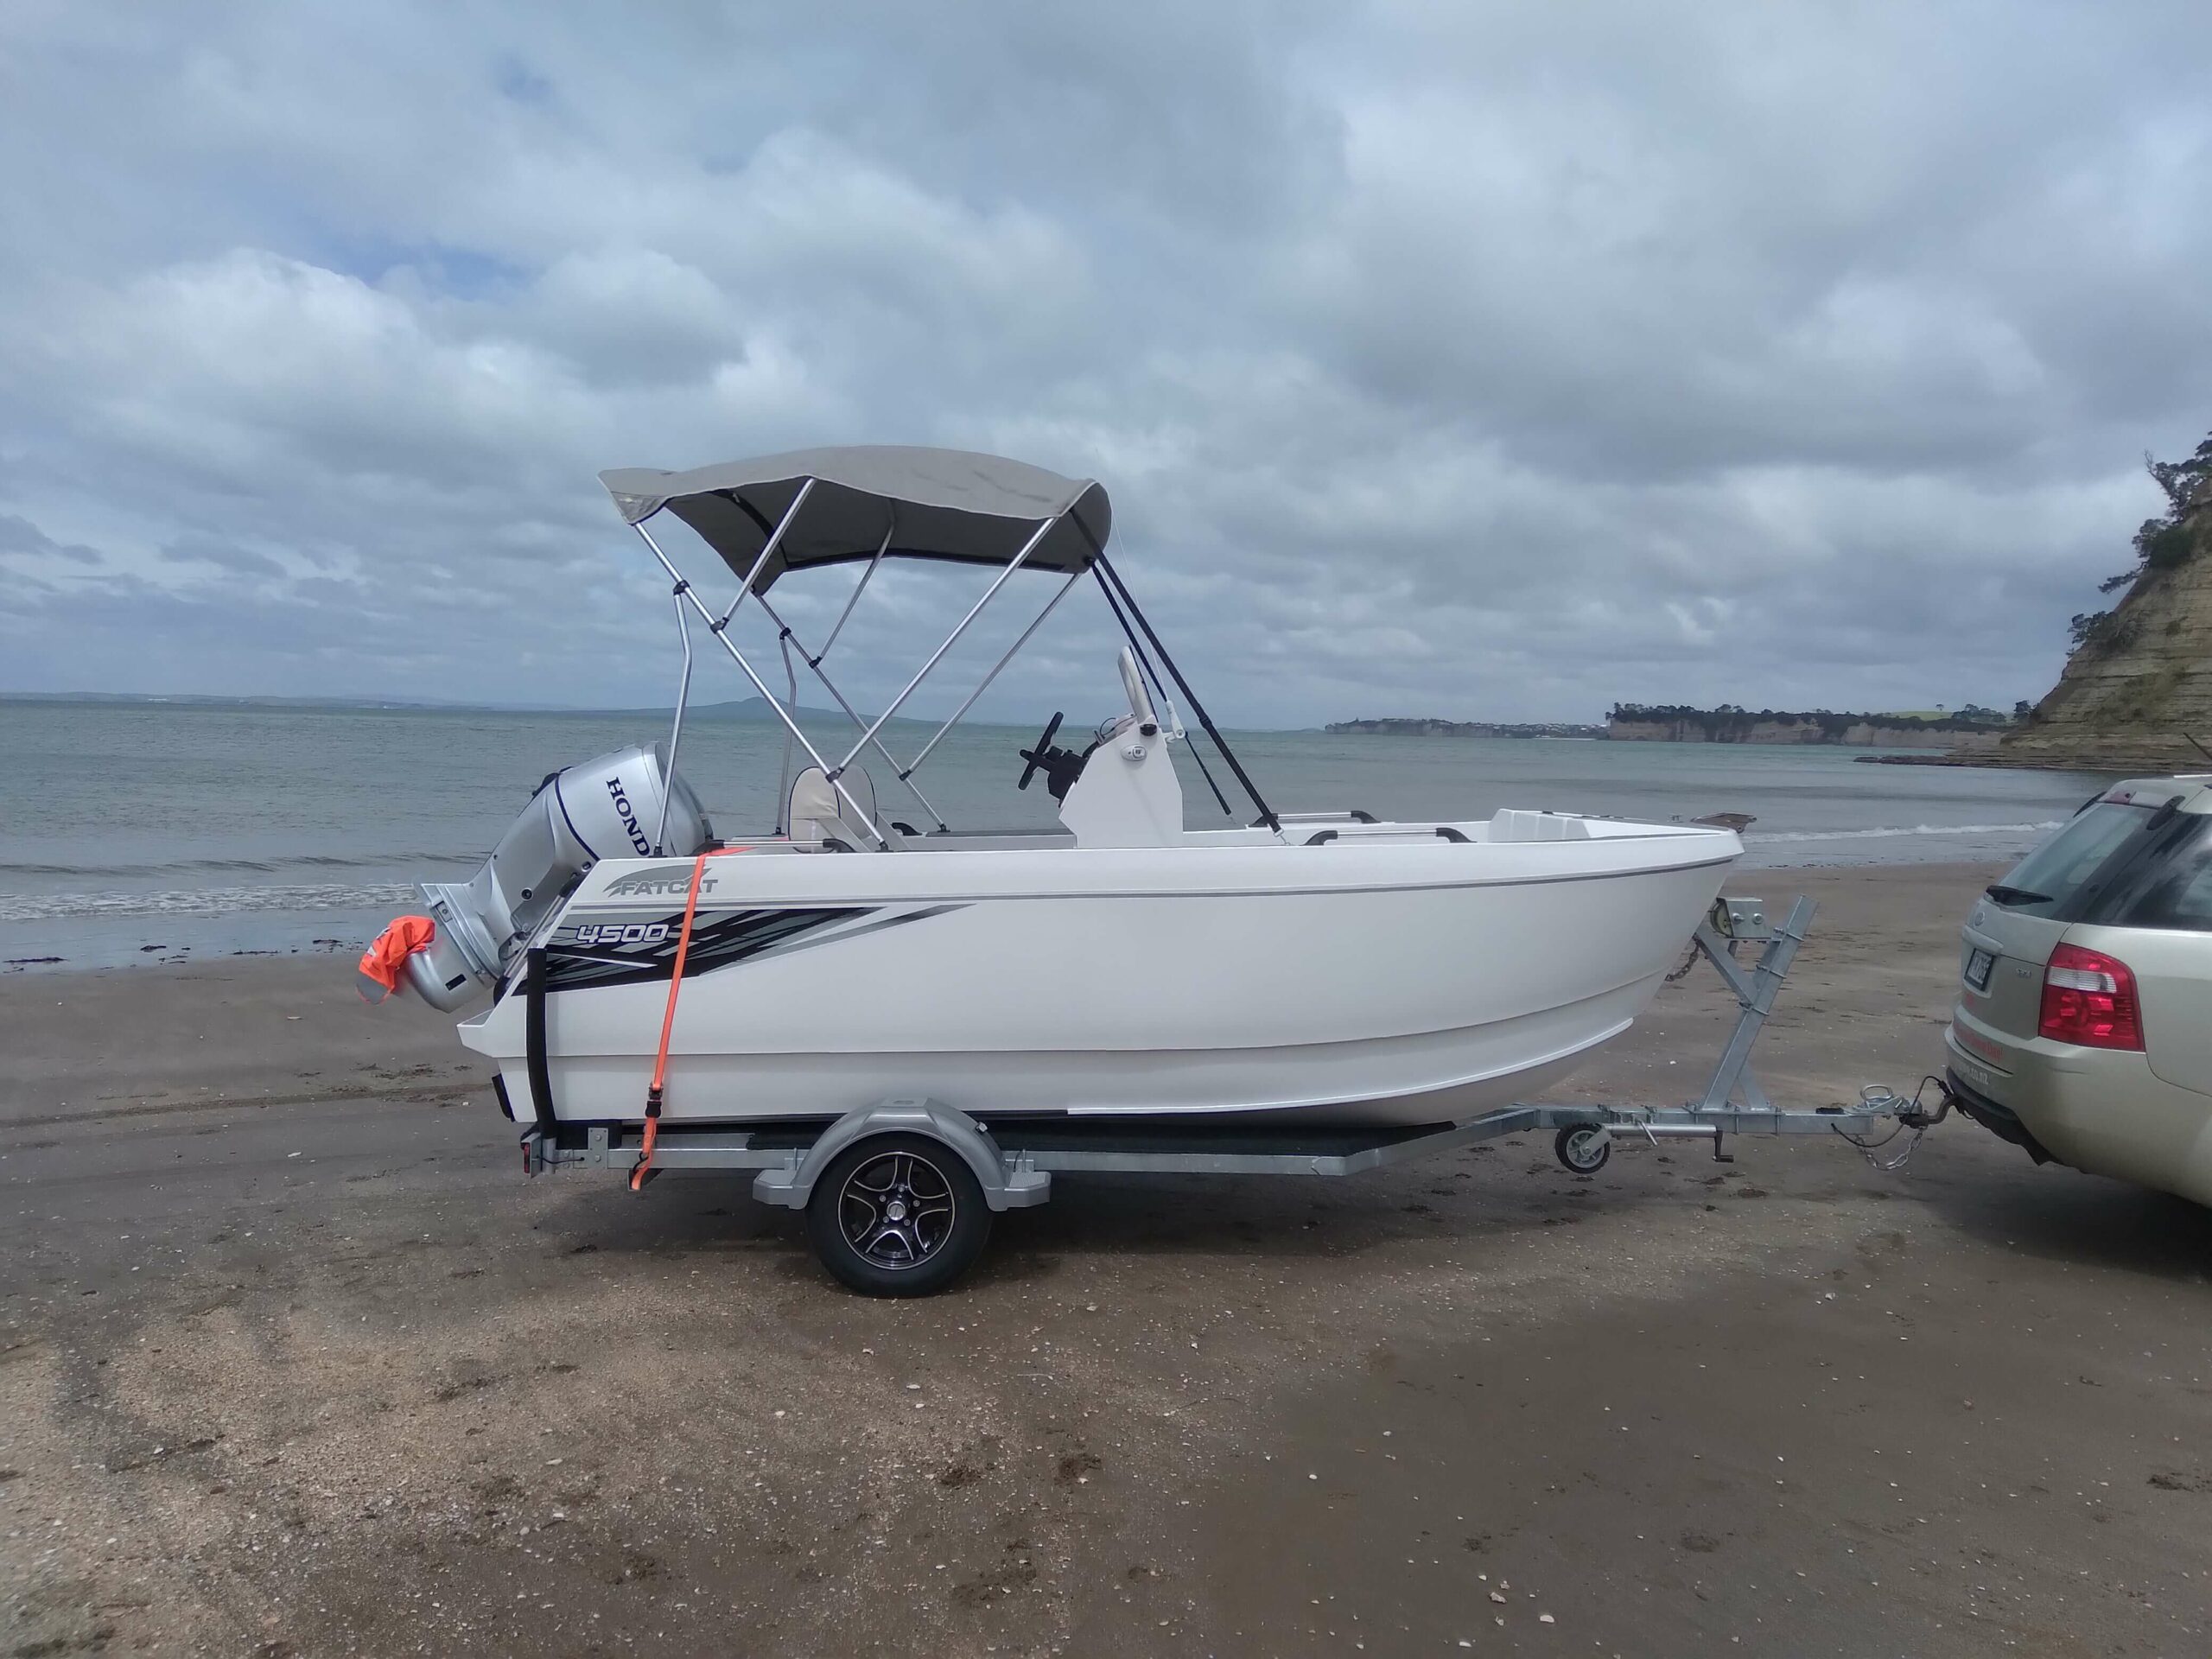 White FatCat 4500 with canopy on beach about to be launched